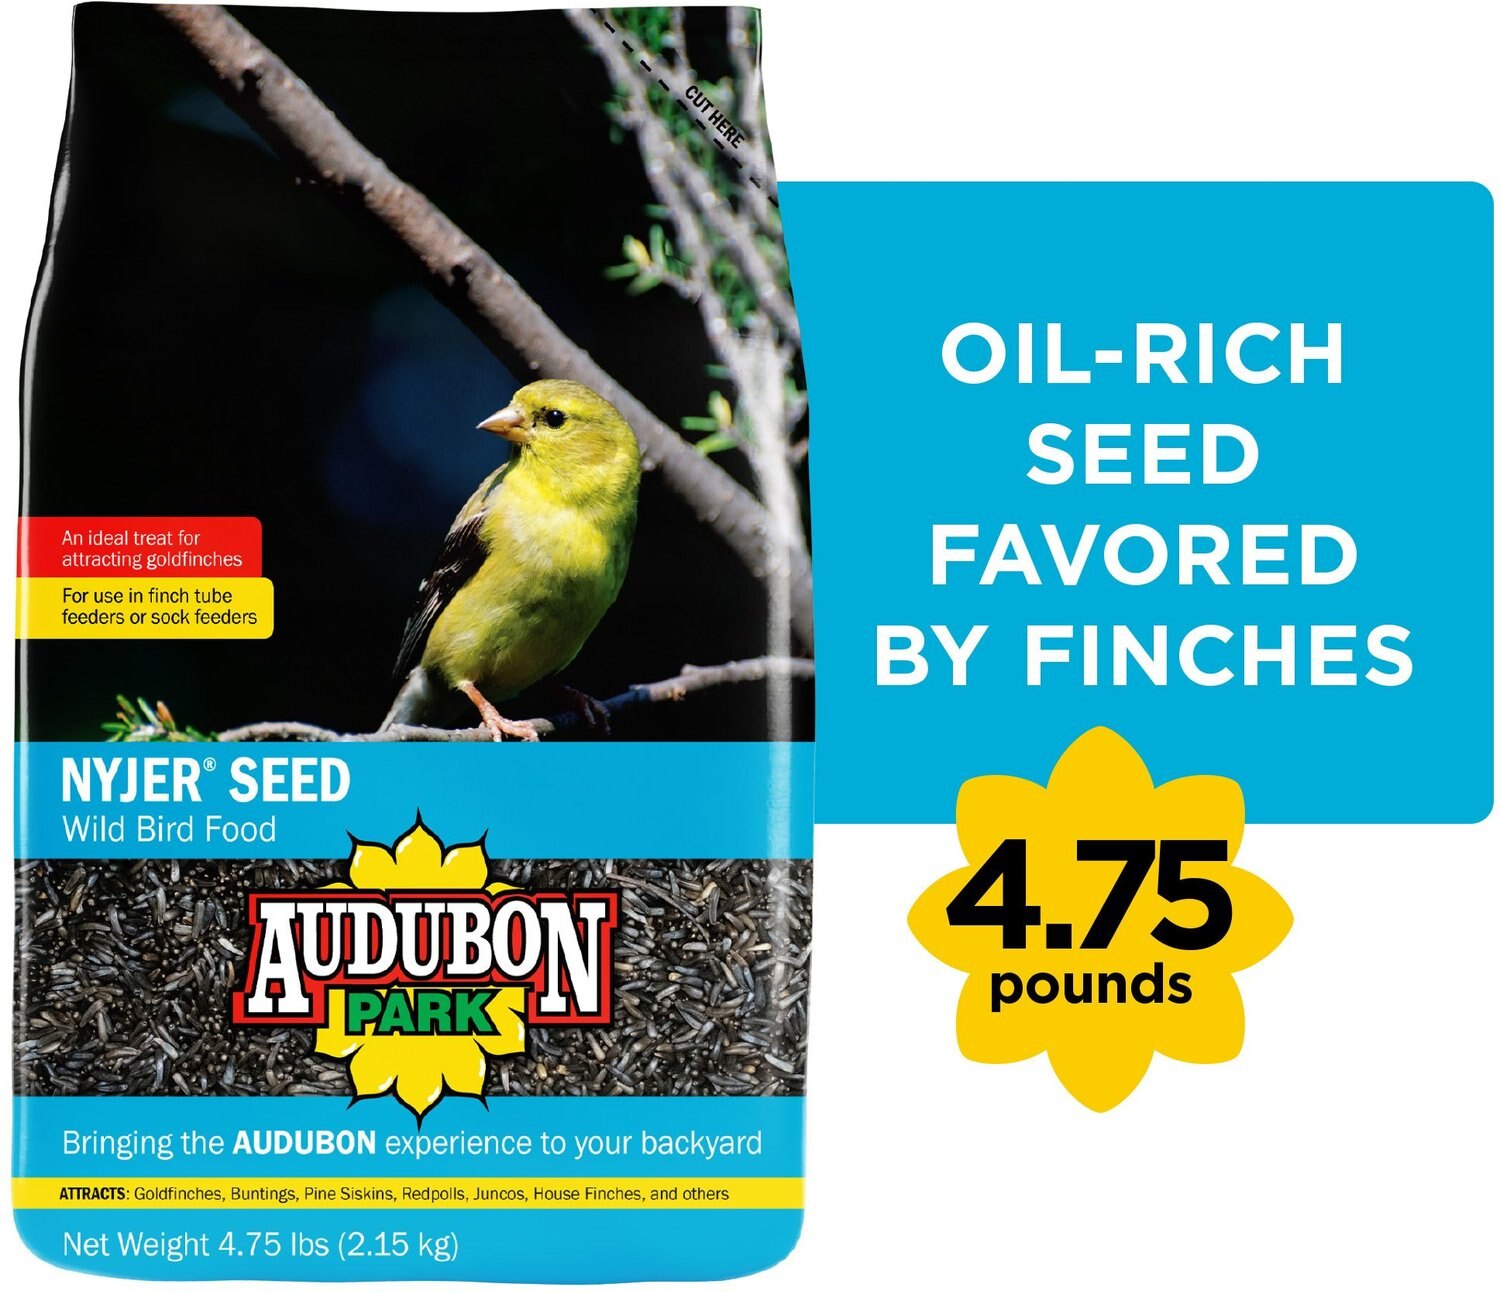 Audubon Park Nyjer Seed Wild Bird Food 4 75 Lb Bag Chewy Com,What Are Cloves Called In Nigeria